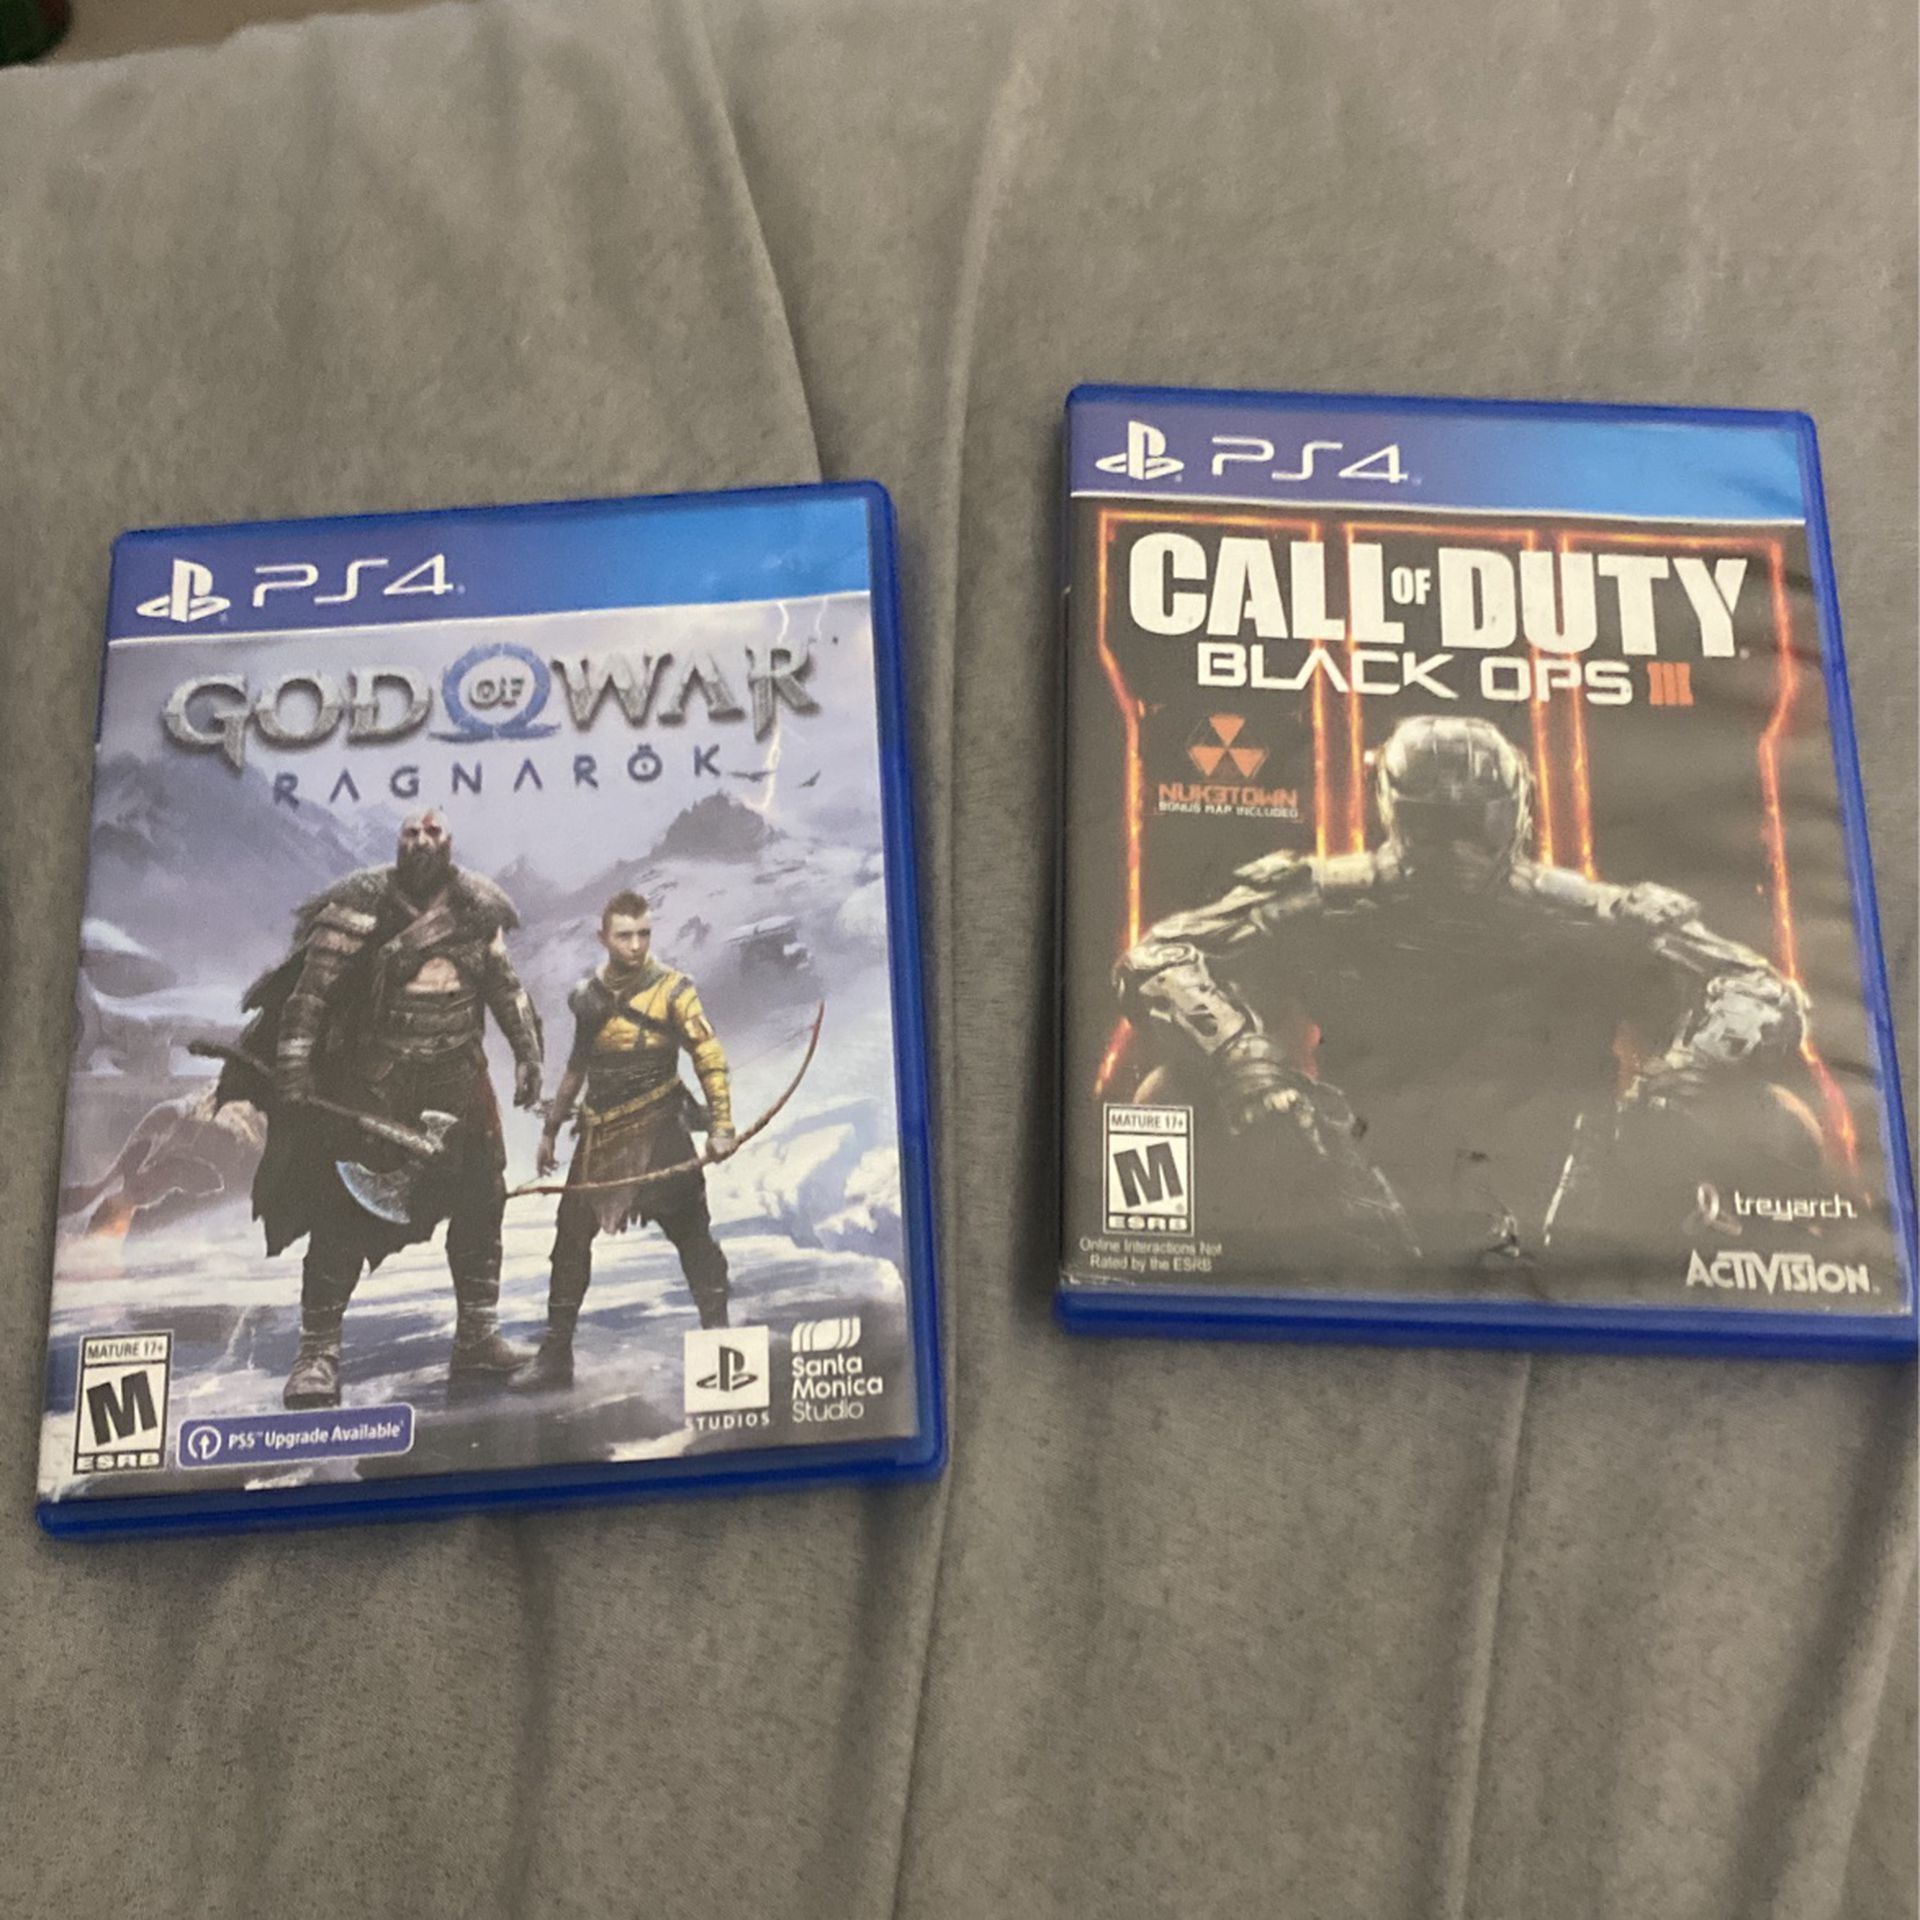 selling both or one (your choice) ps4 games